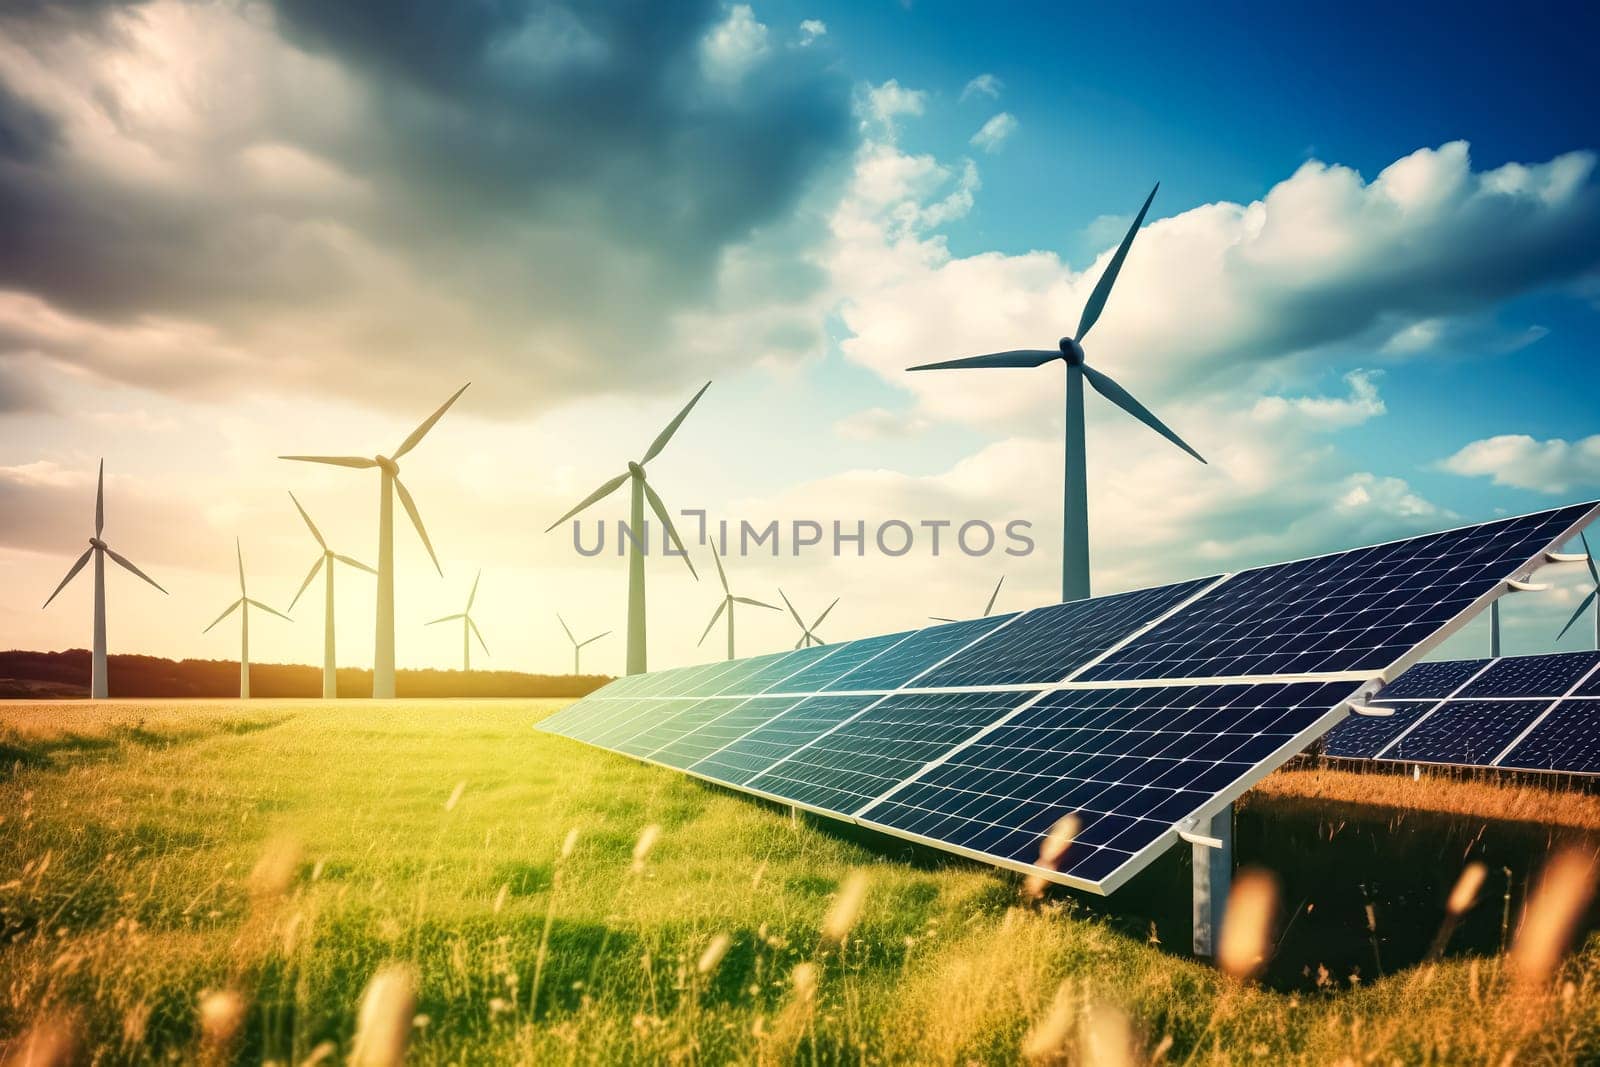 Solar panels and wind turbine illustrating green planet and renewable energy. Standard visual concept capturing the harmony of sustainable power sources.